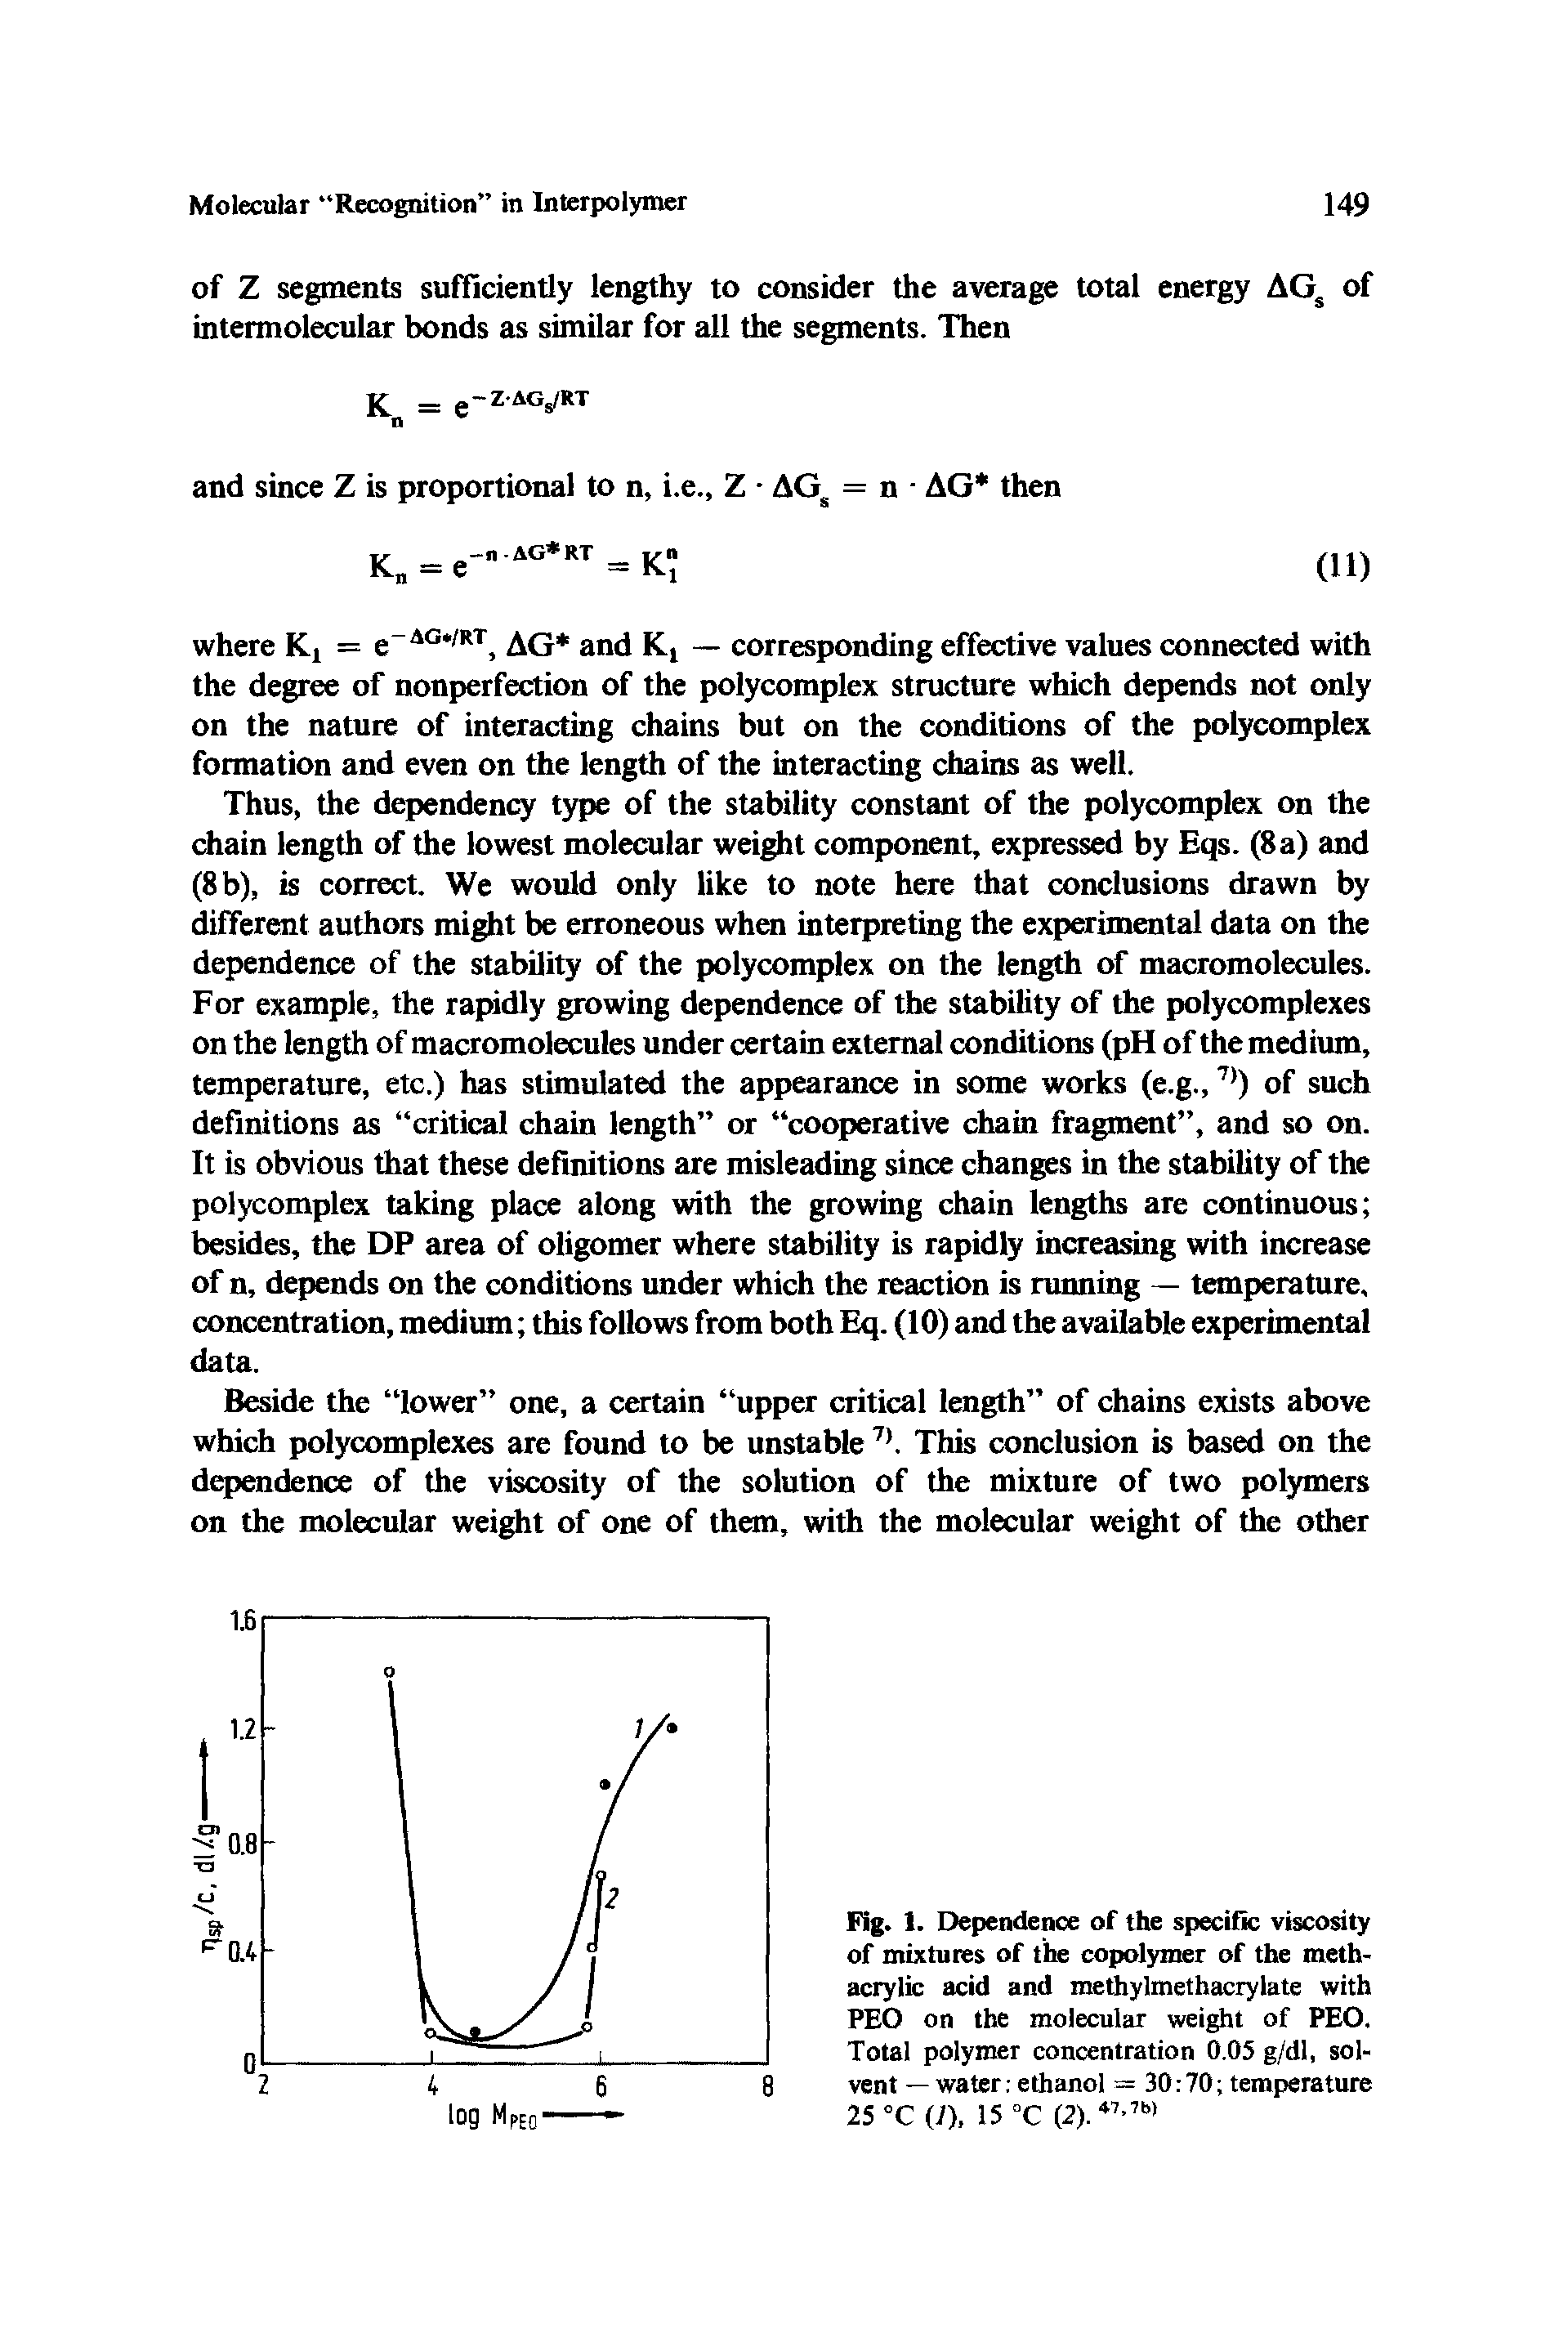 Fig. 1. Dependence of the specific viscosity of mixtures of the copolymer of the meth-acrylic acid and methylmethacrylate with PEO on the molecular weight of PEO. Total polymer concentration 0.05 g/dl, solvent — water ethanol = 30 70 temperature 25 °C (7), 15 °C (2). 47,7b)...